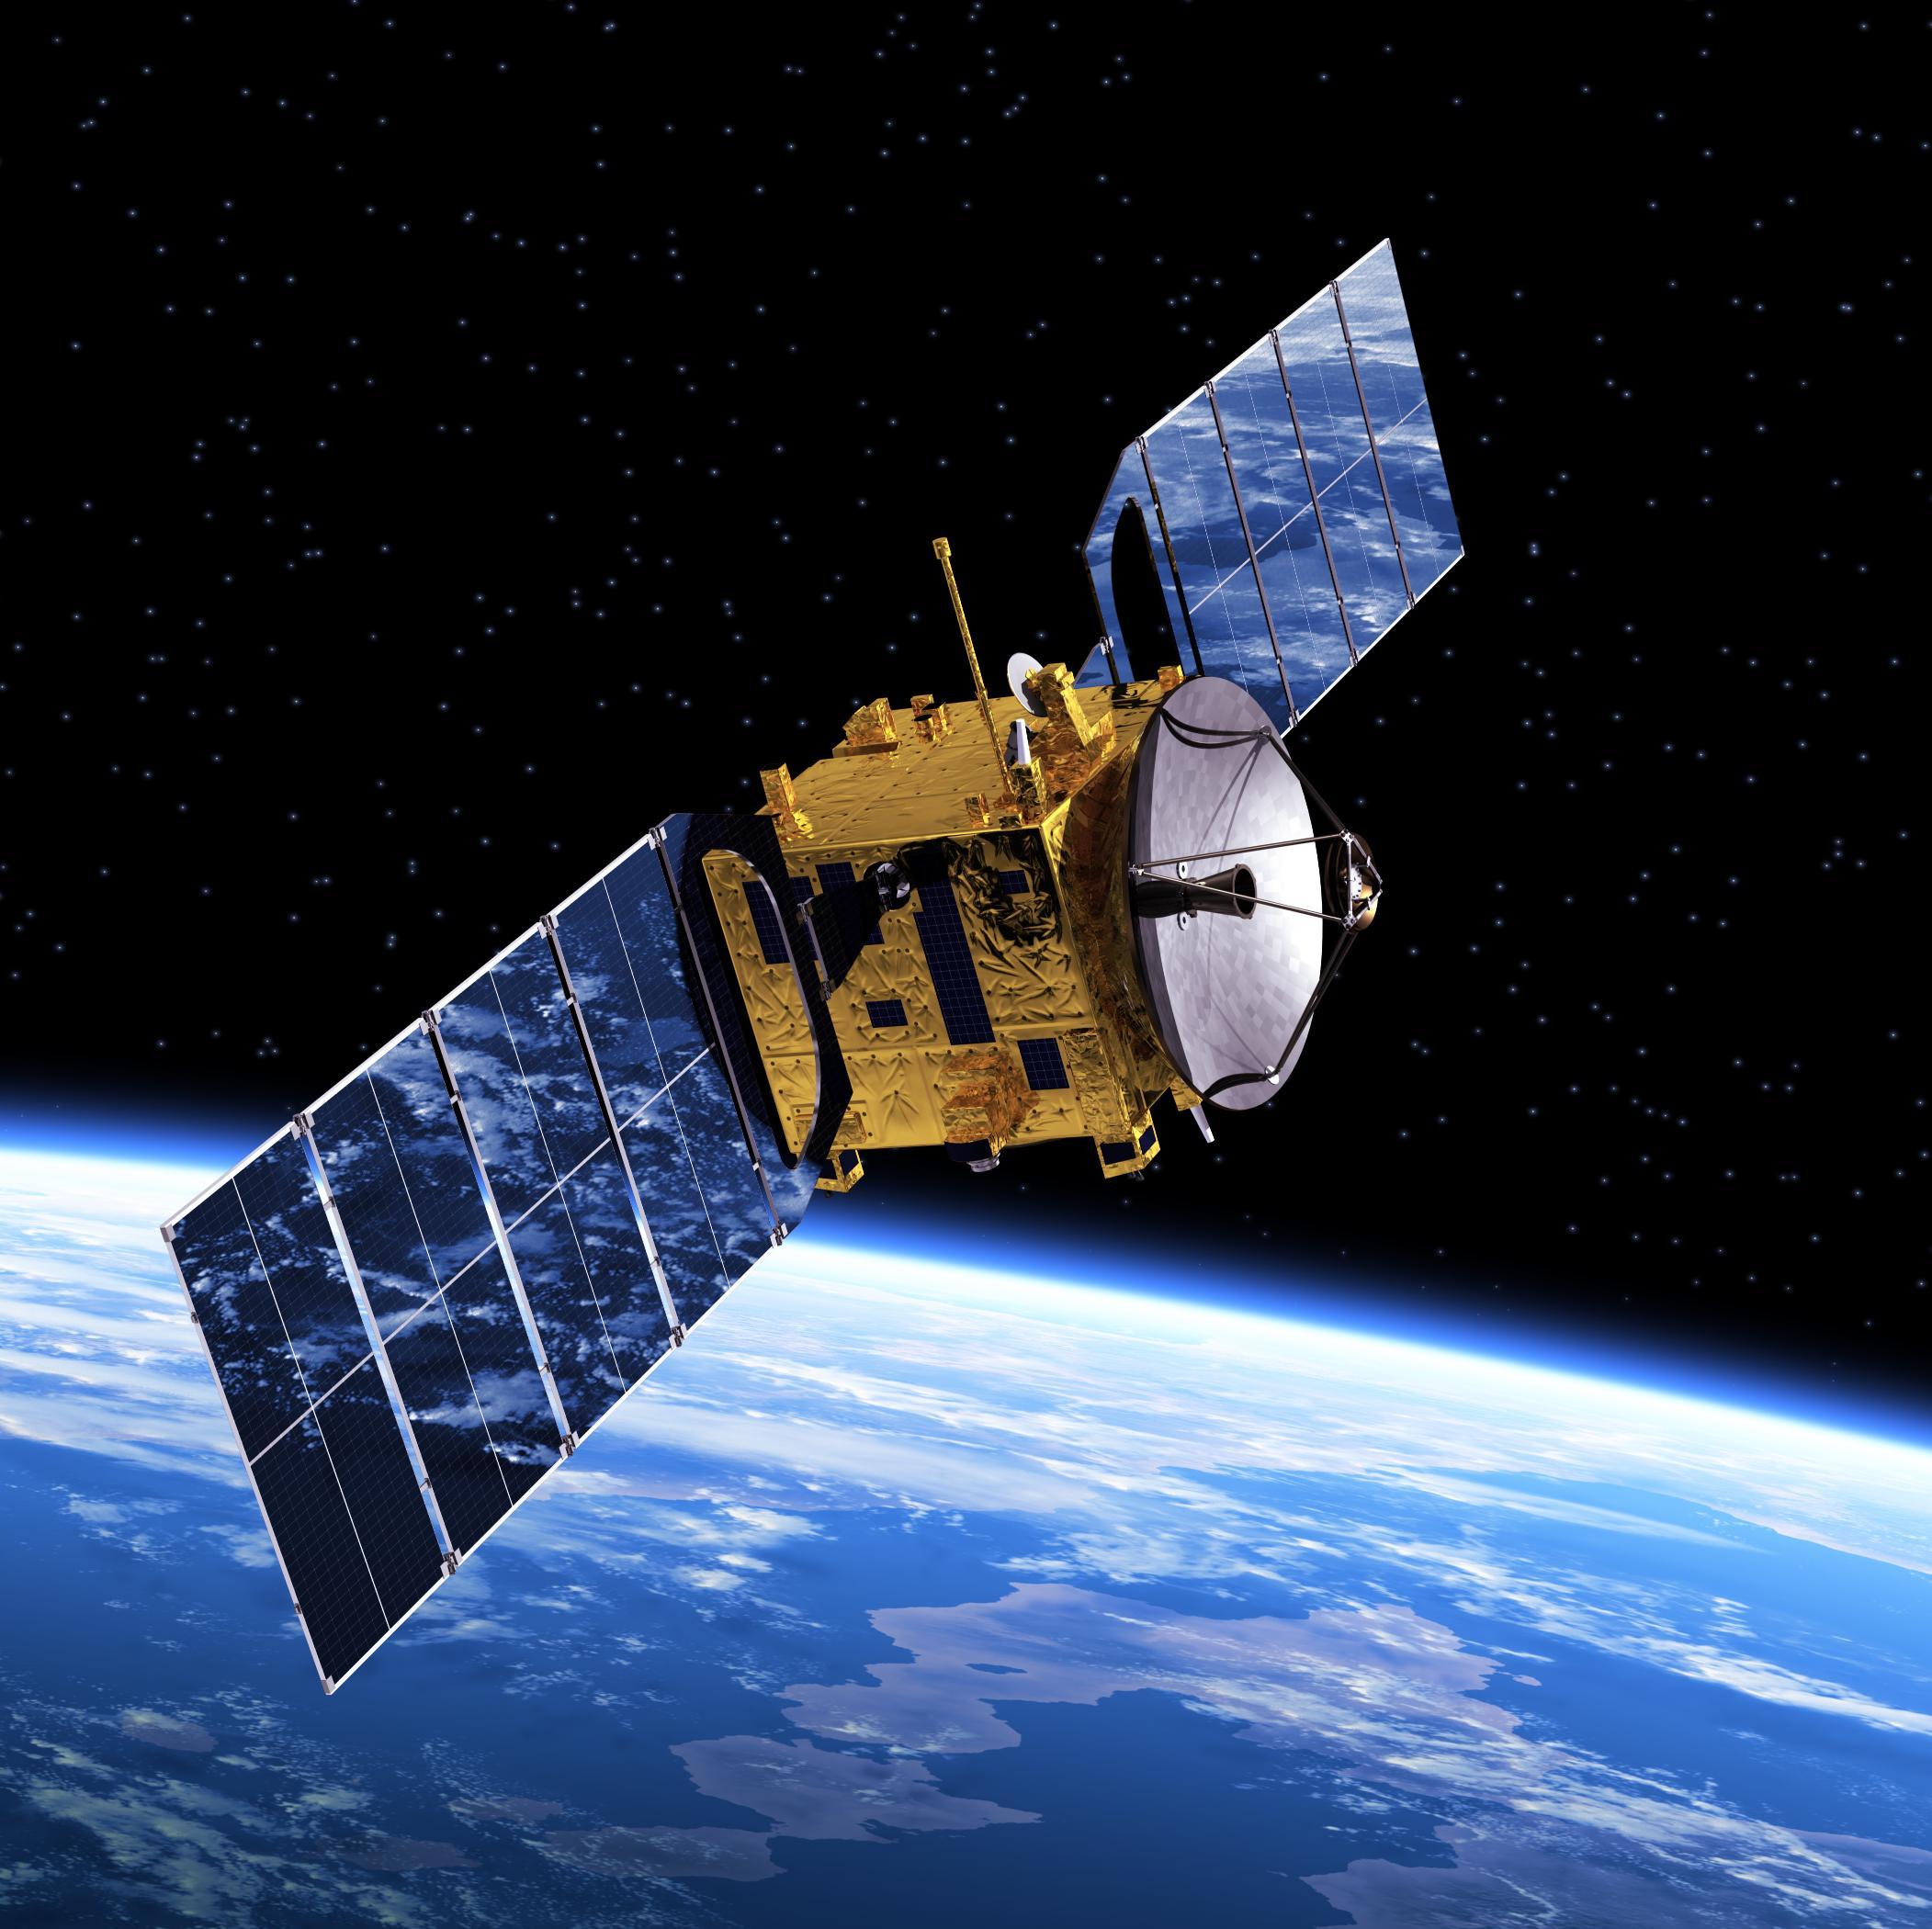 The 33rd AIAA International Communications Satellite Systems Conference (ICSSC) 7-10 Sep 2015 #satcom #satellites #engineering #technology #communications